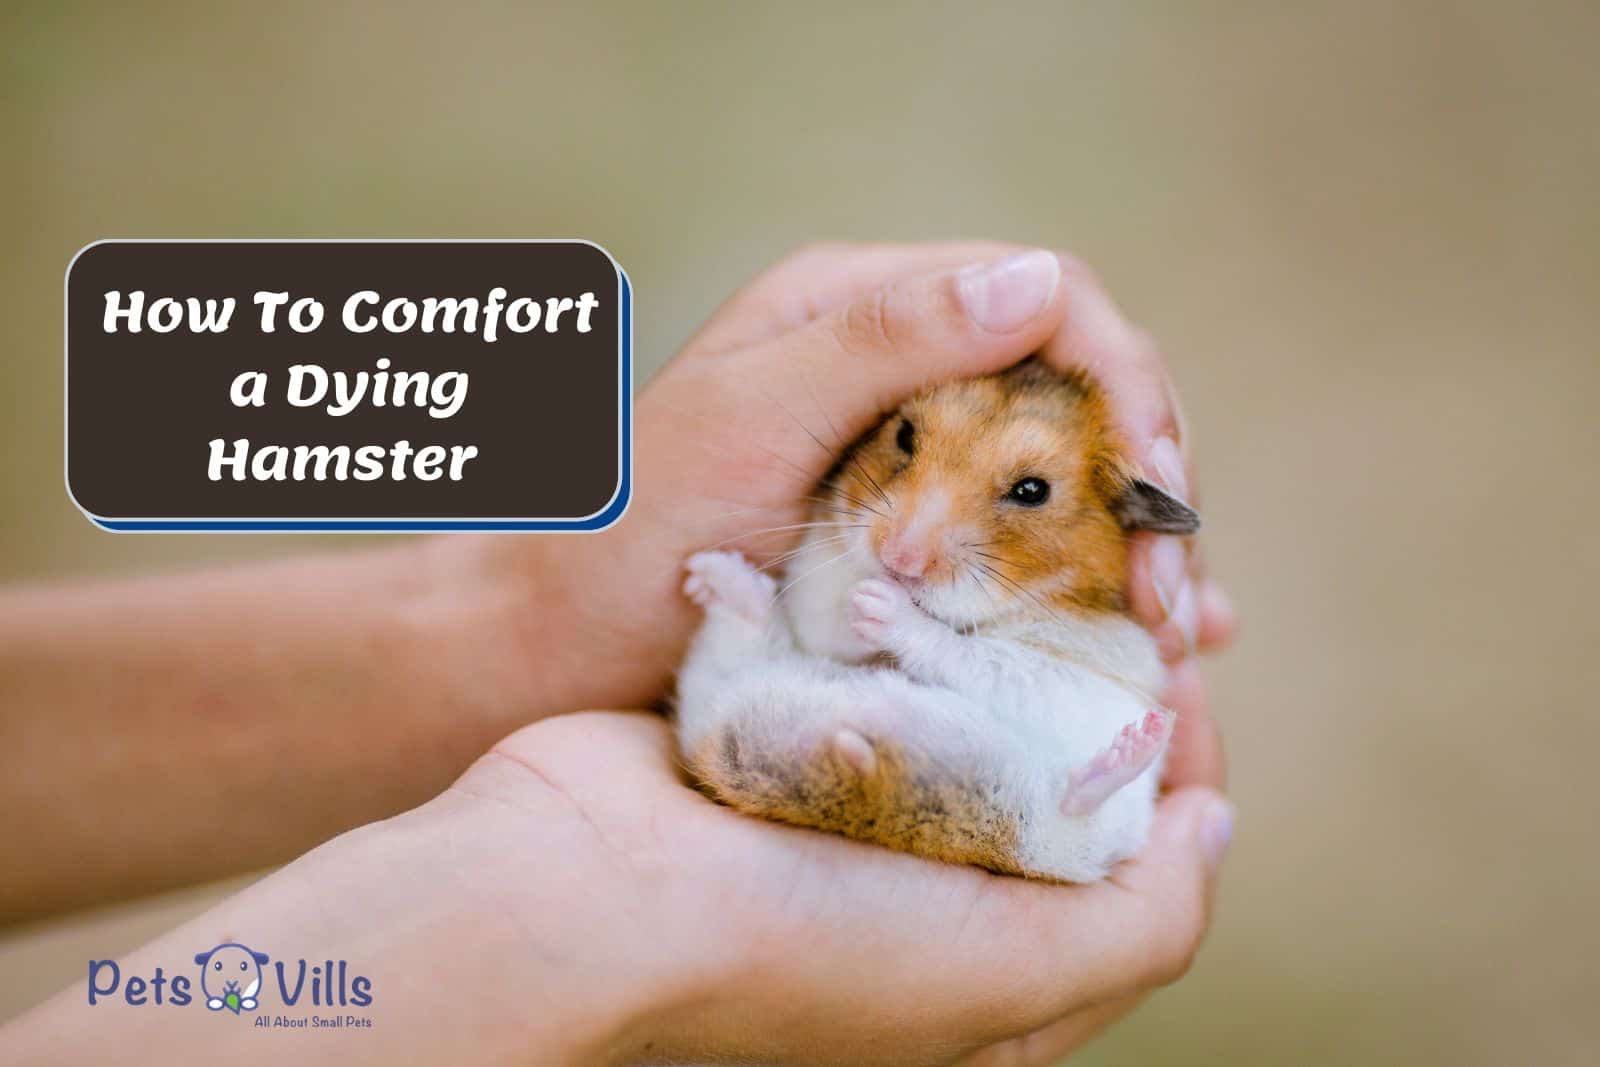 hamster in the hands of the lady so How To Comfort a Dying Hamster?